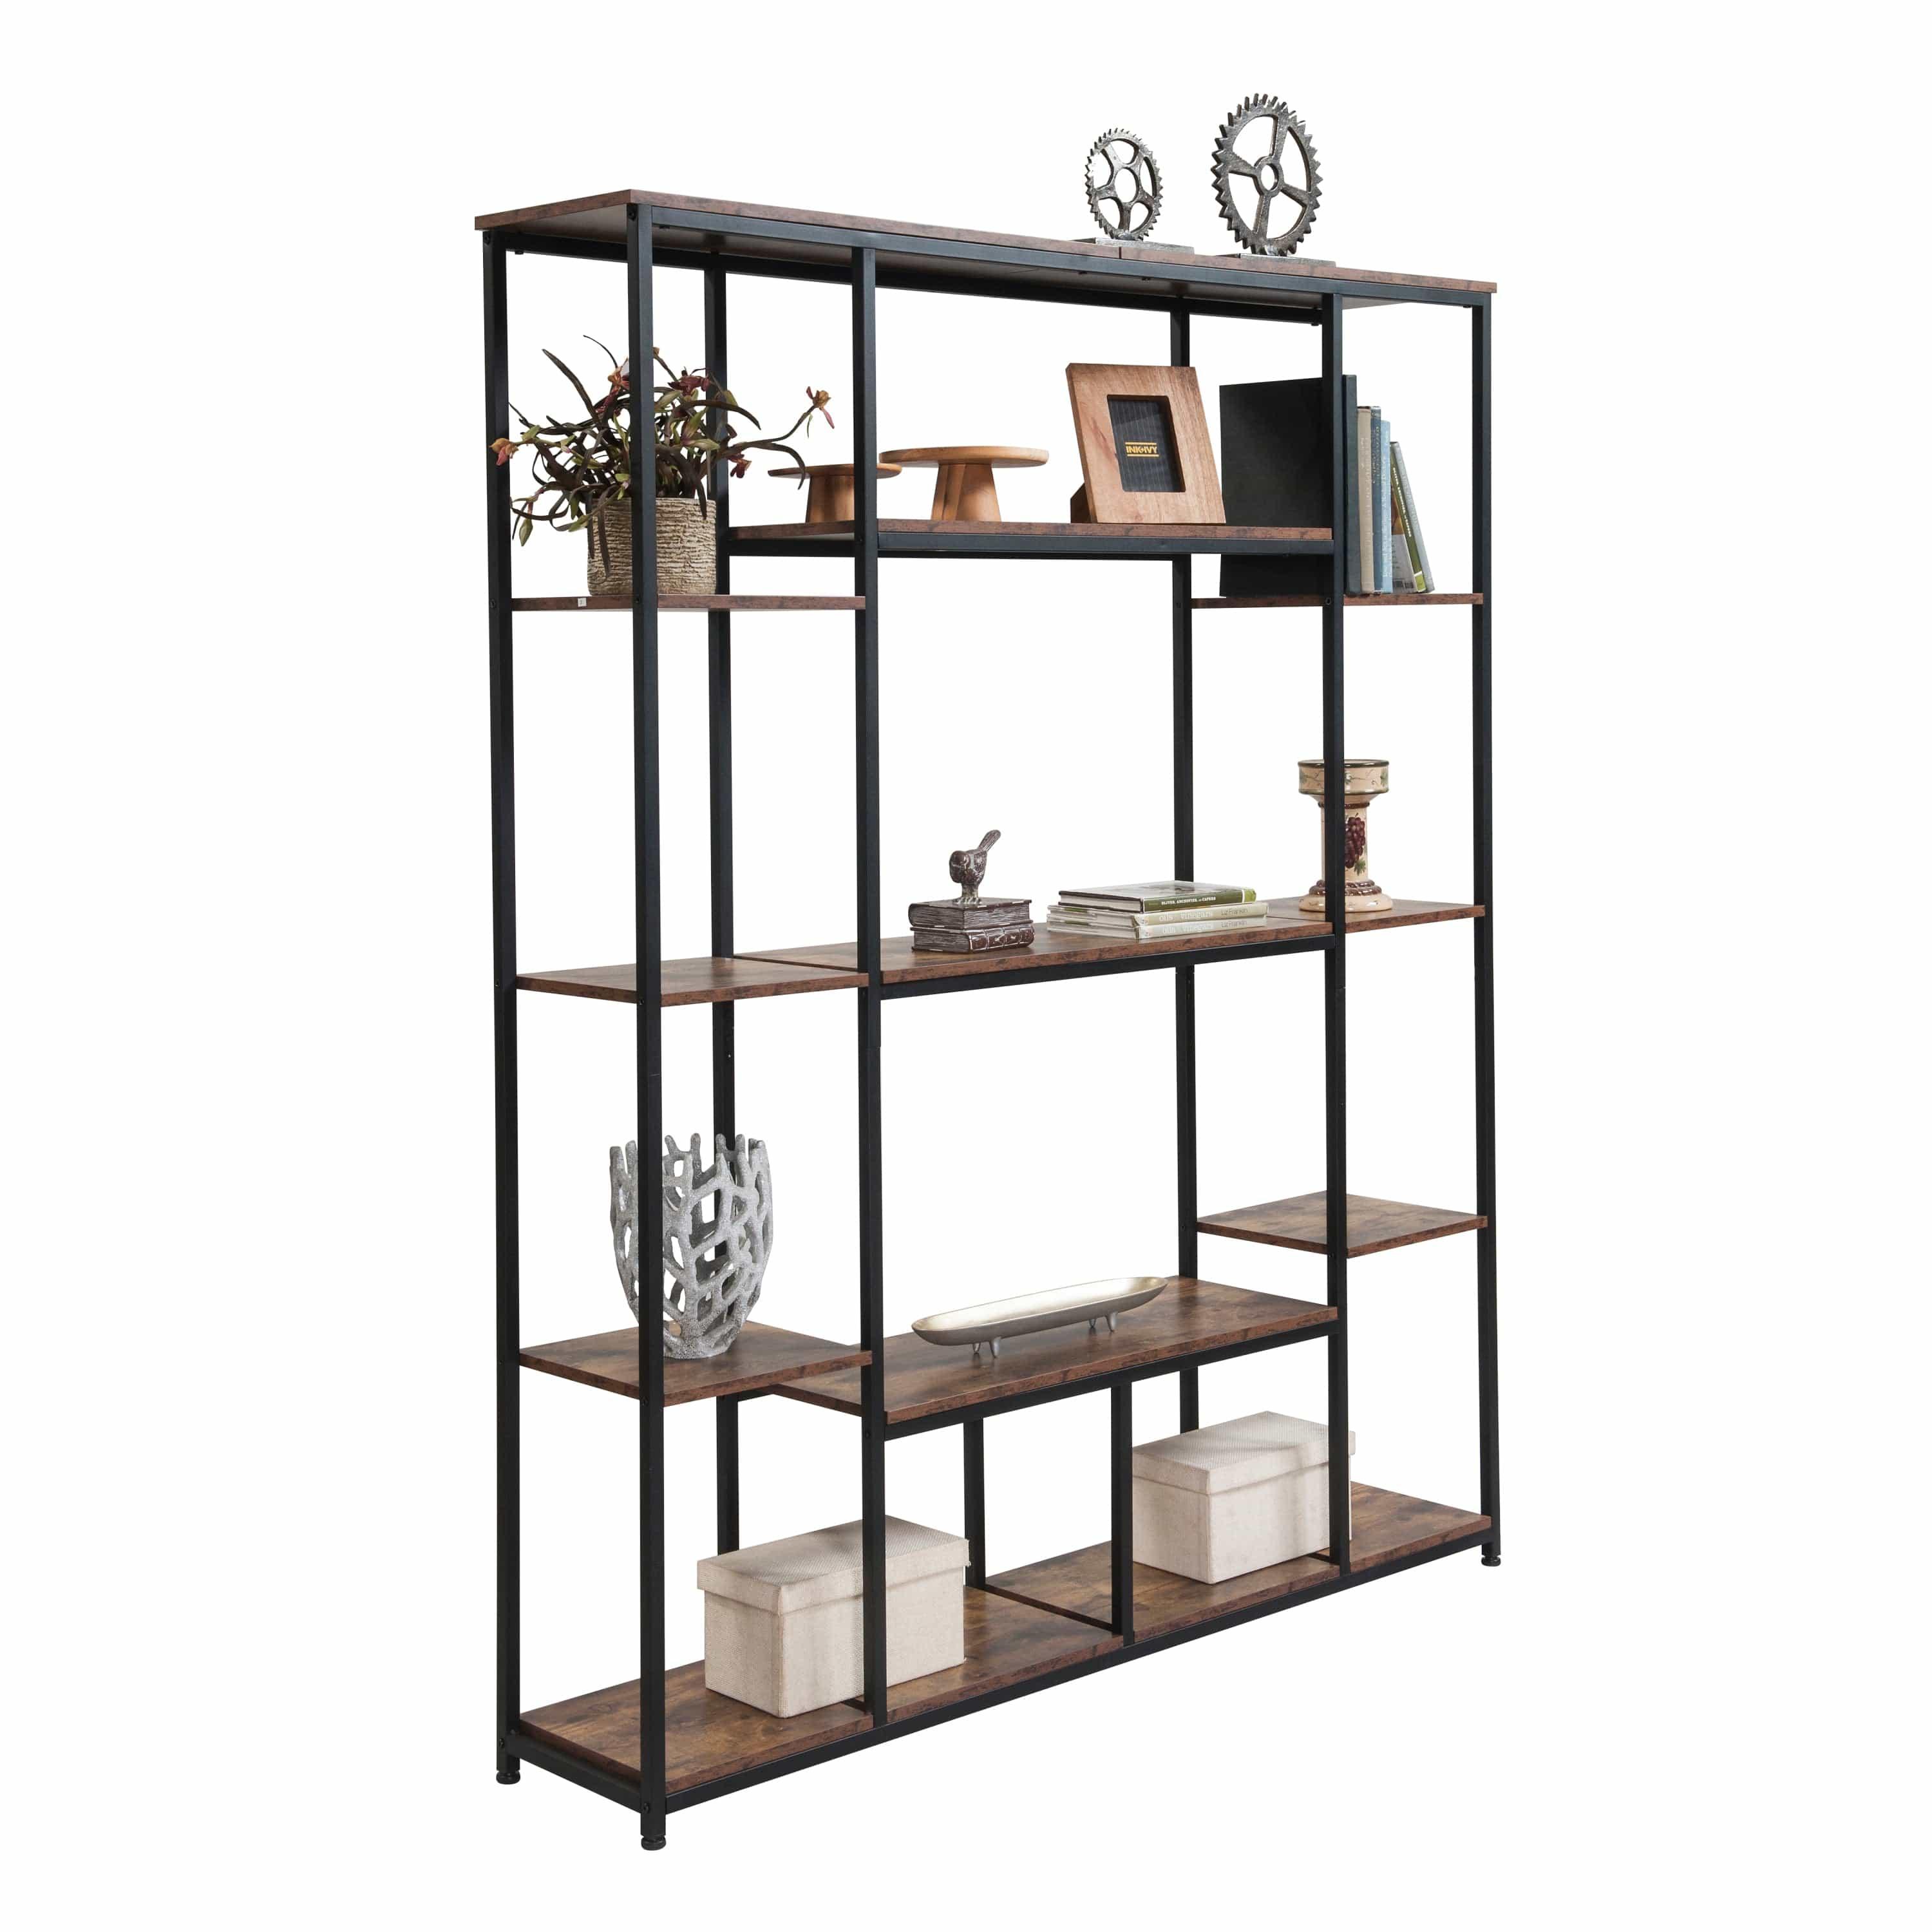 Shop [VIDEO] Bookcase and Bookshelf, Home Office 5 Tier Bookshelf, Open Freestanding Storage Shelf with Metal Frame, Tiger Mademoiselle Home Decor